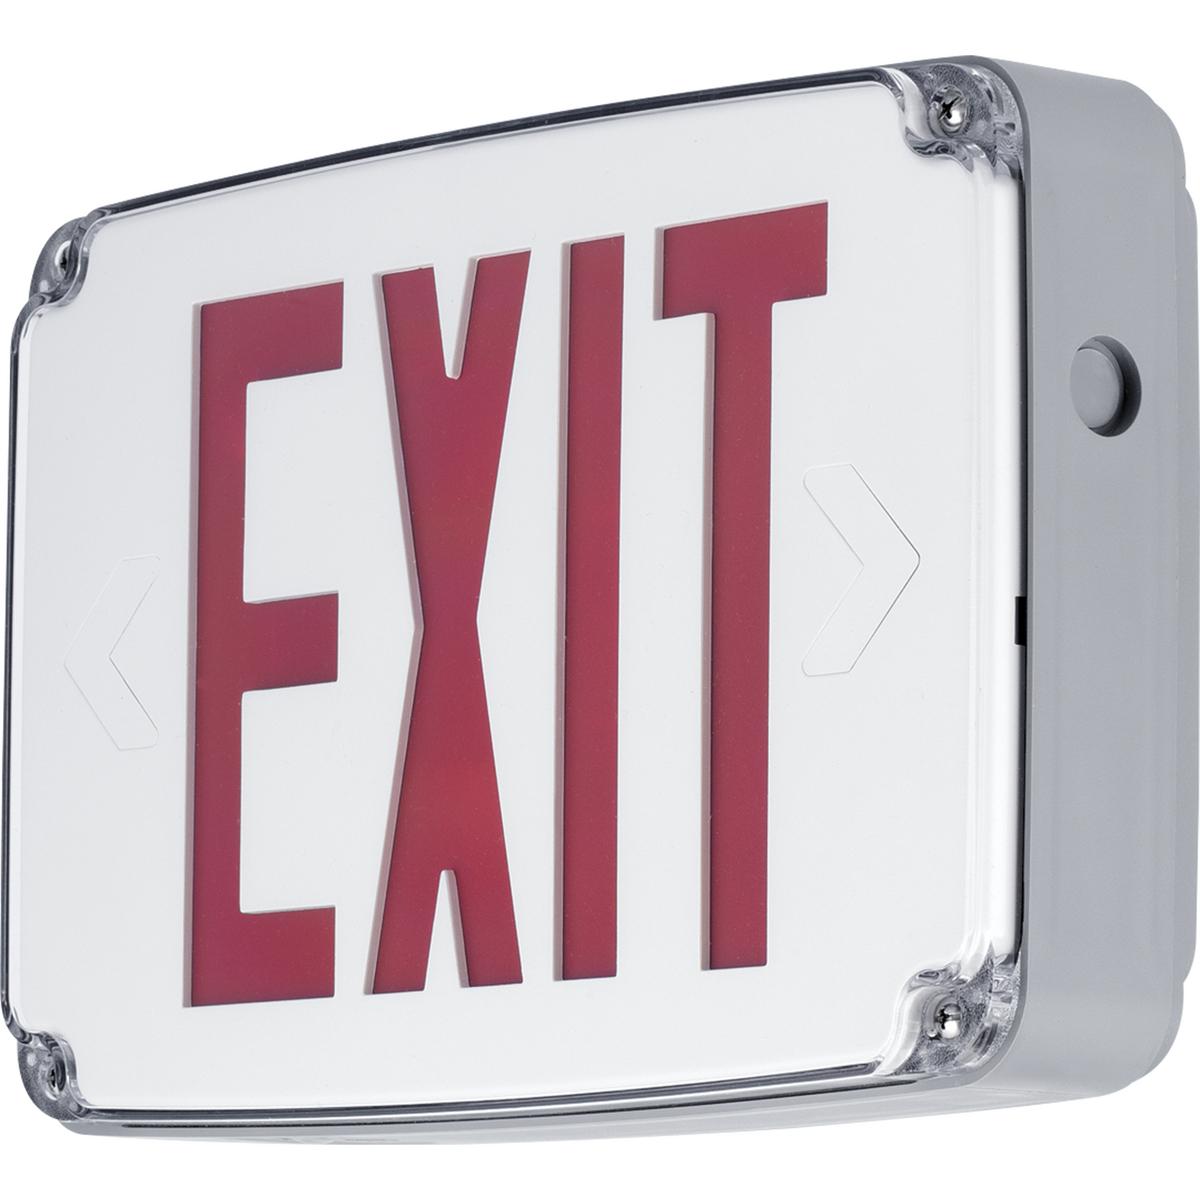 Hubbell PEWLE-DR-30 The PEWLE Series offers quality and value with a wet location rated emergency Exit sign. Housing and face-plate made from impact resistant UV stabilized polycarbonate. Housing is corrosion resistant and face-plate is fully gasketed. Exit face illumination